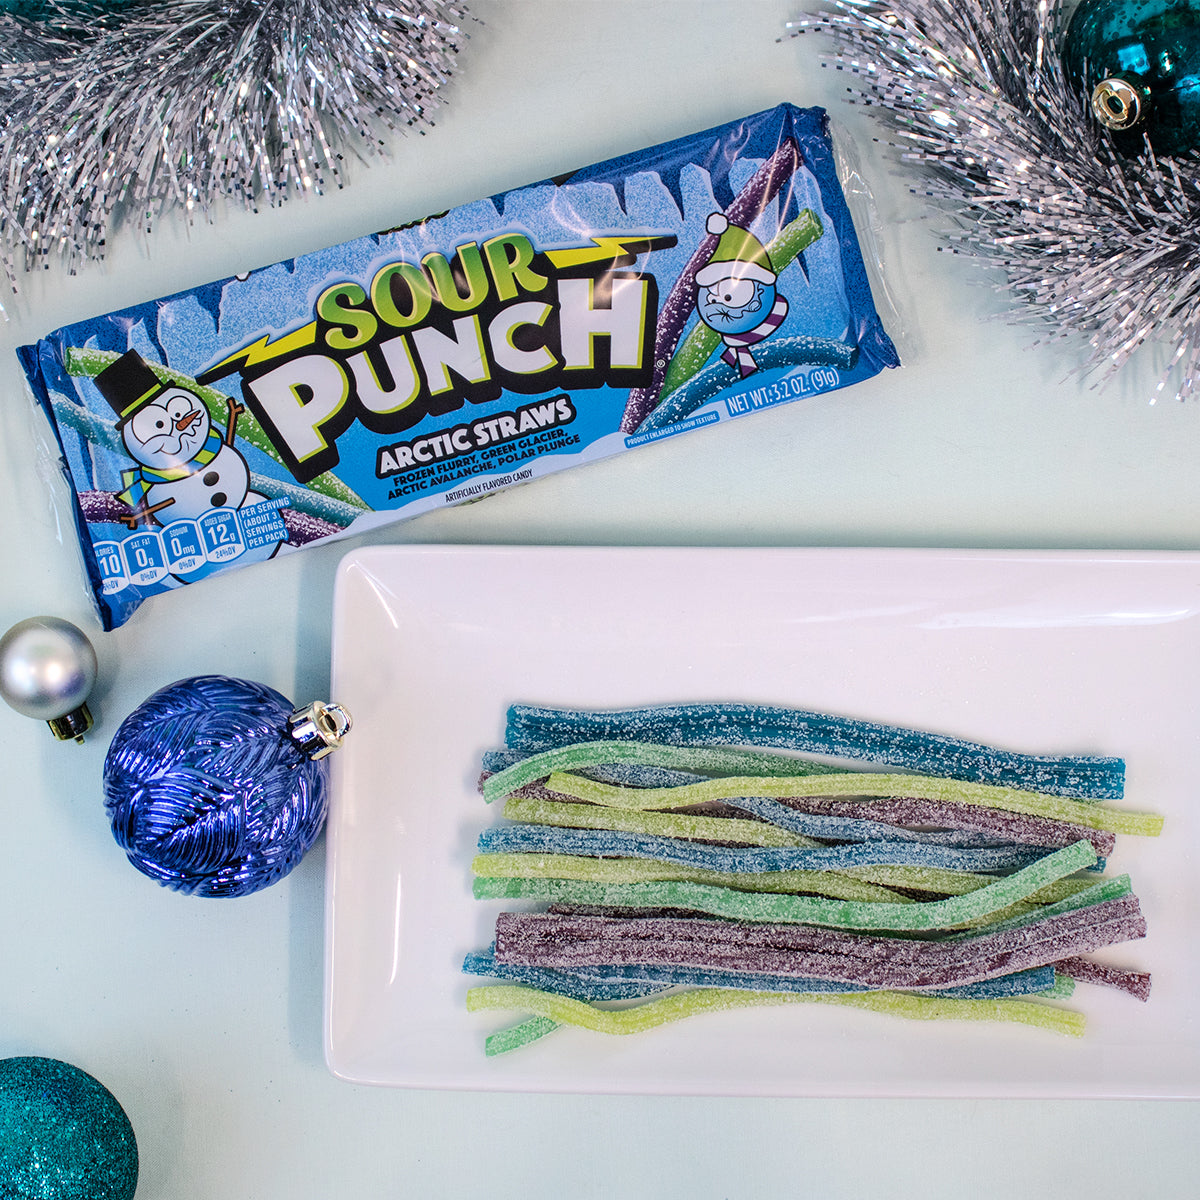 Sour Punch Santa Straws and Arctic Straws are now on TikTok Shop